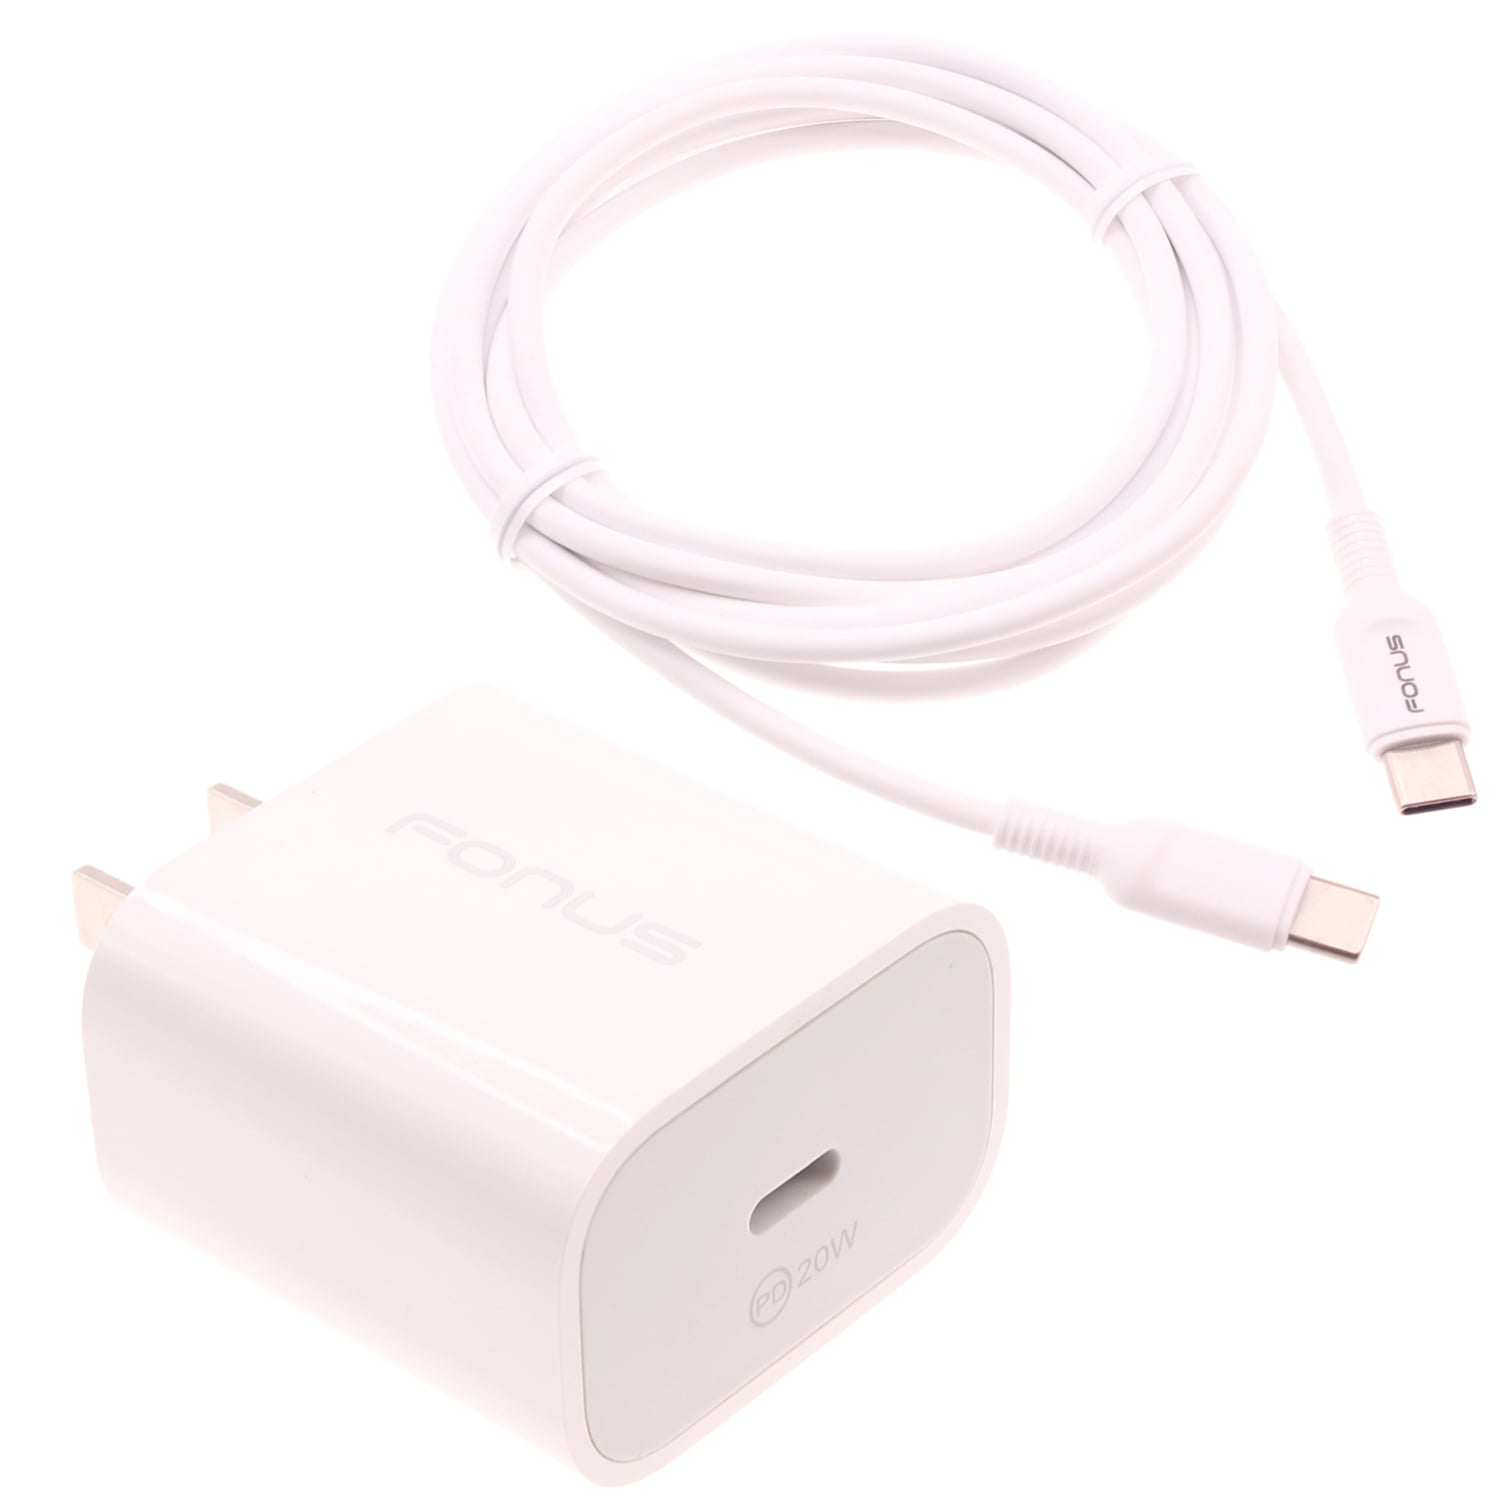 2.1A Wall AC Charger+USB Cable for Samsung Galaxy Tab E Lite 7.0 Tablet SM-T113 